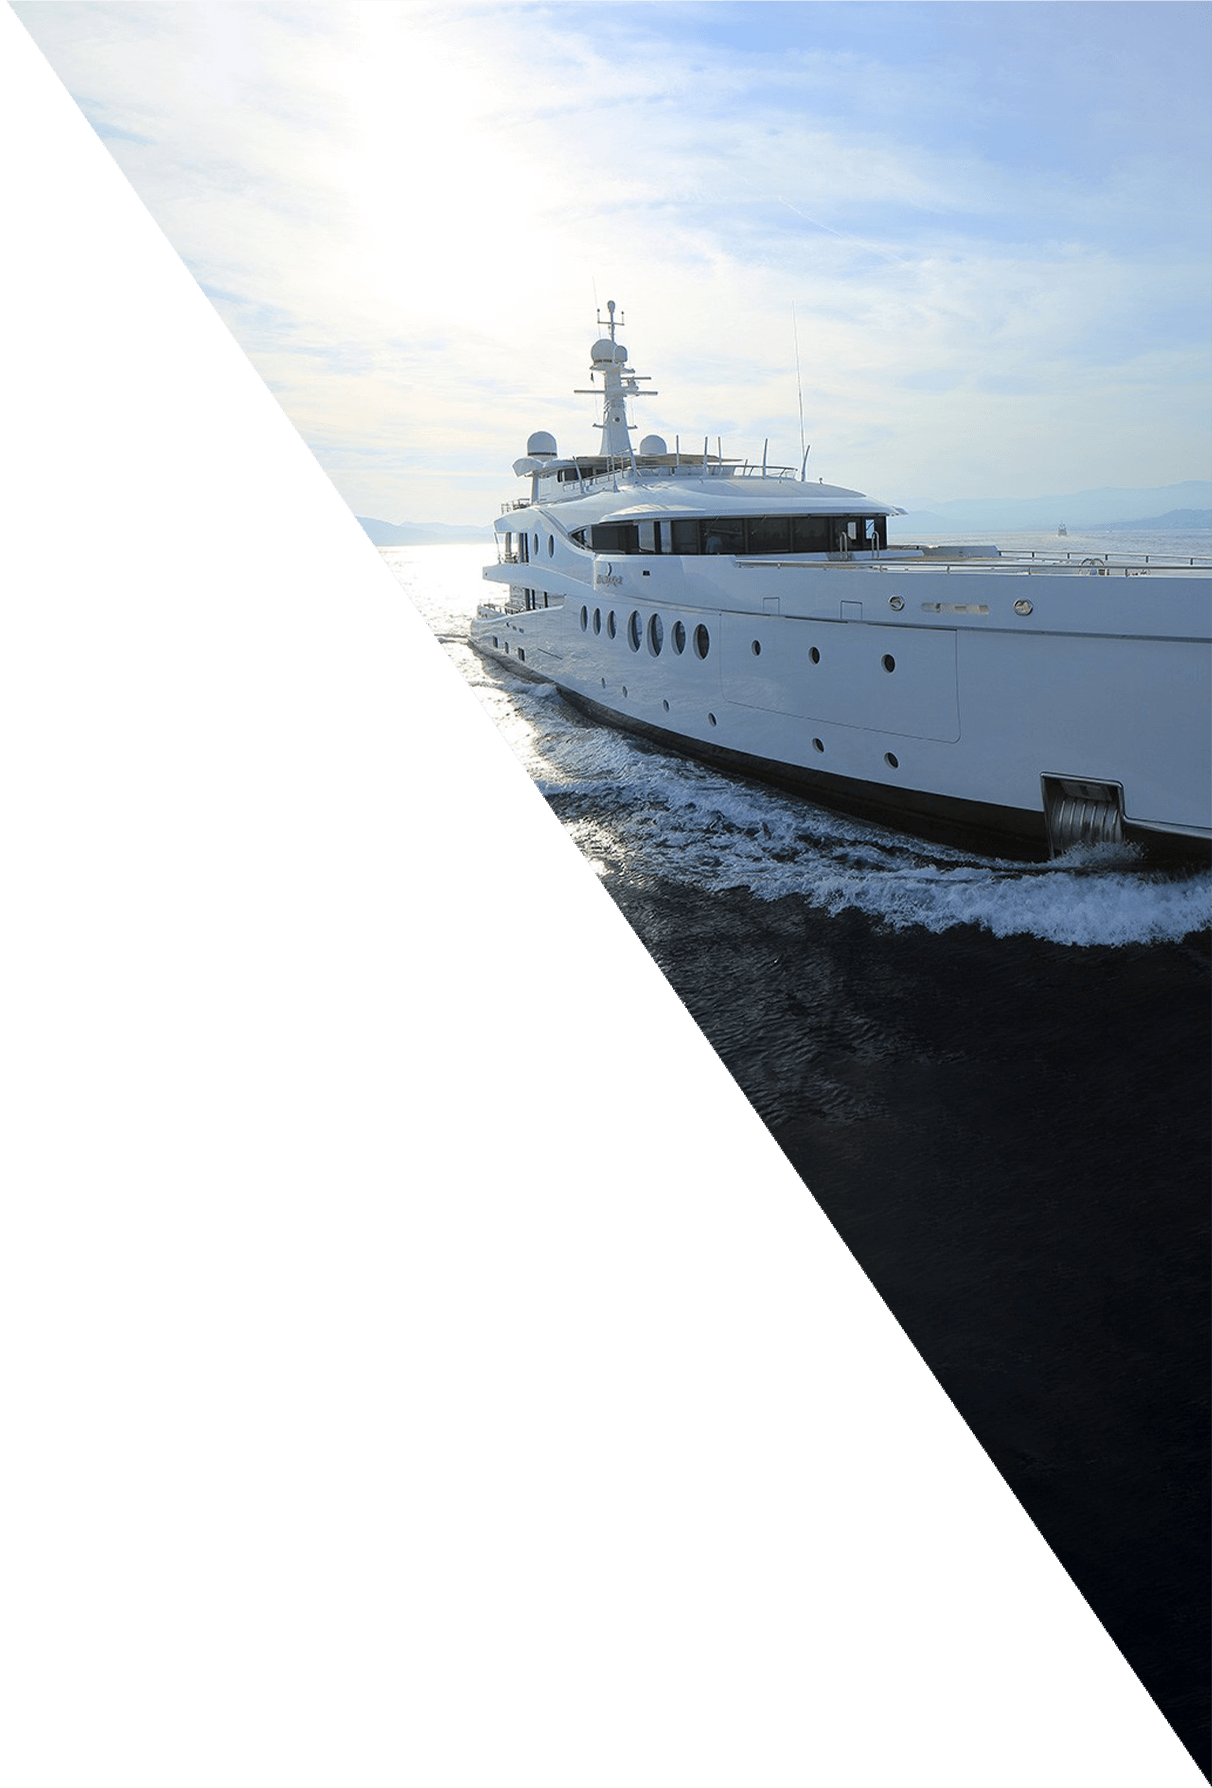 Saltwater is specialized in the yacht building industry. We offer new designs or modifications and additions to existing yachts.